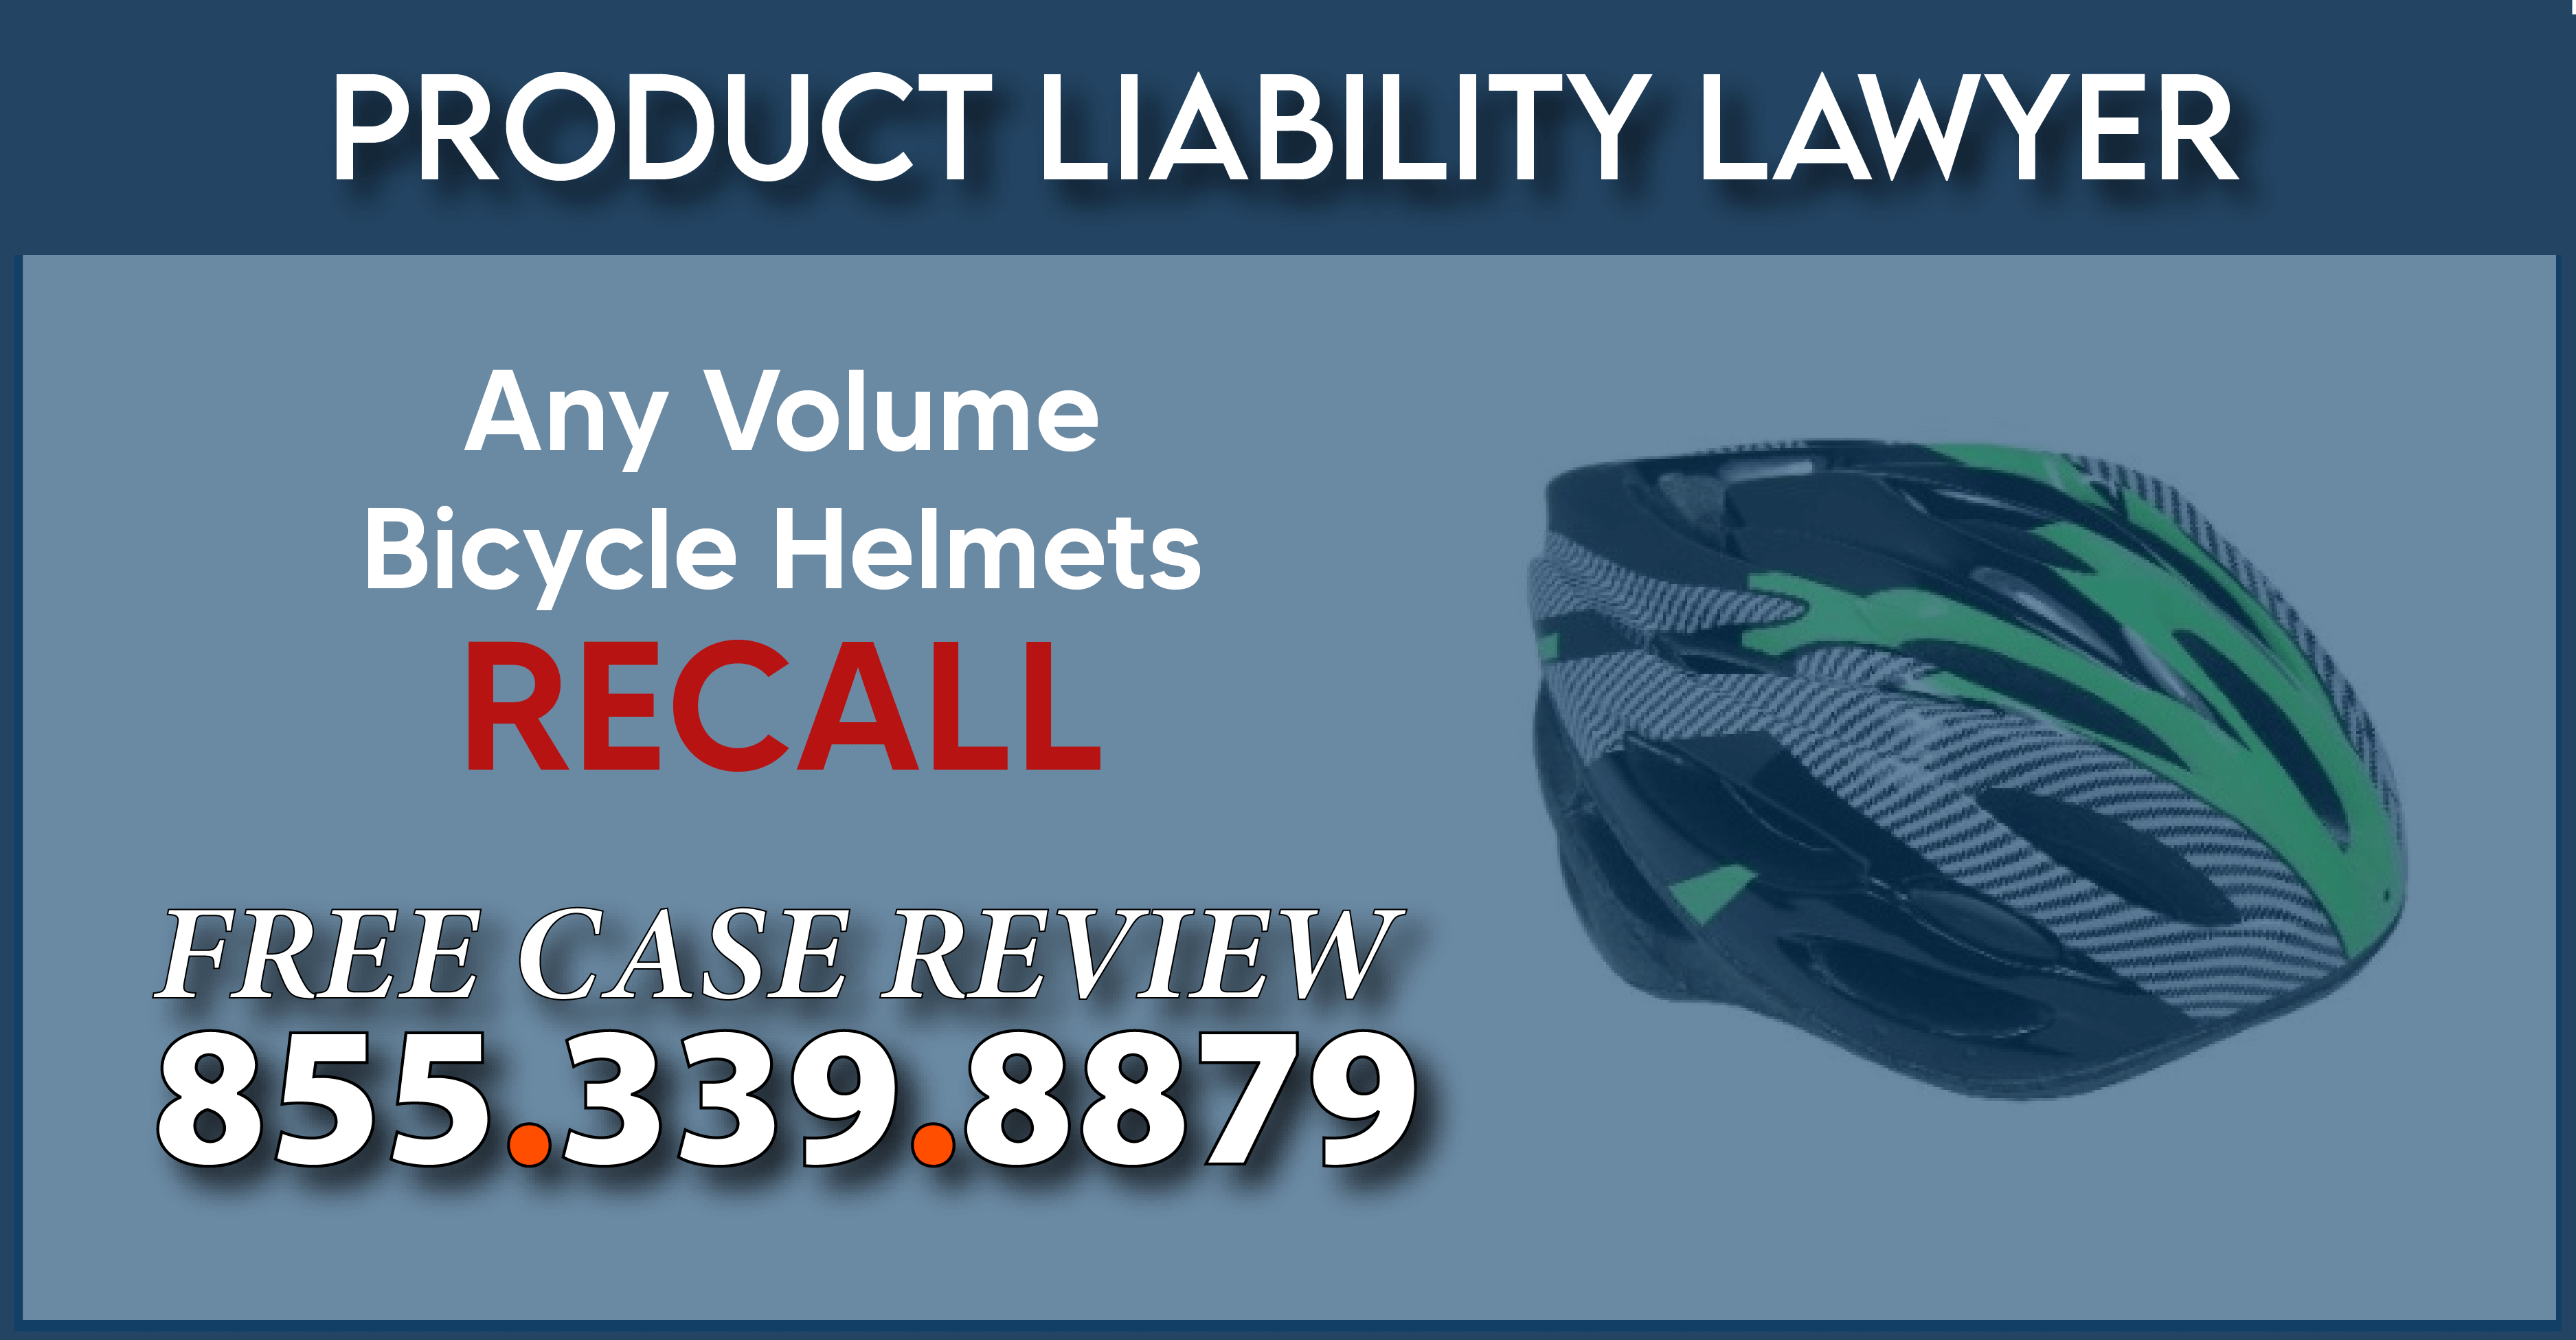 any bicycle helmet recall product liability lawyer